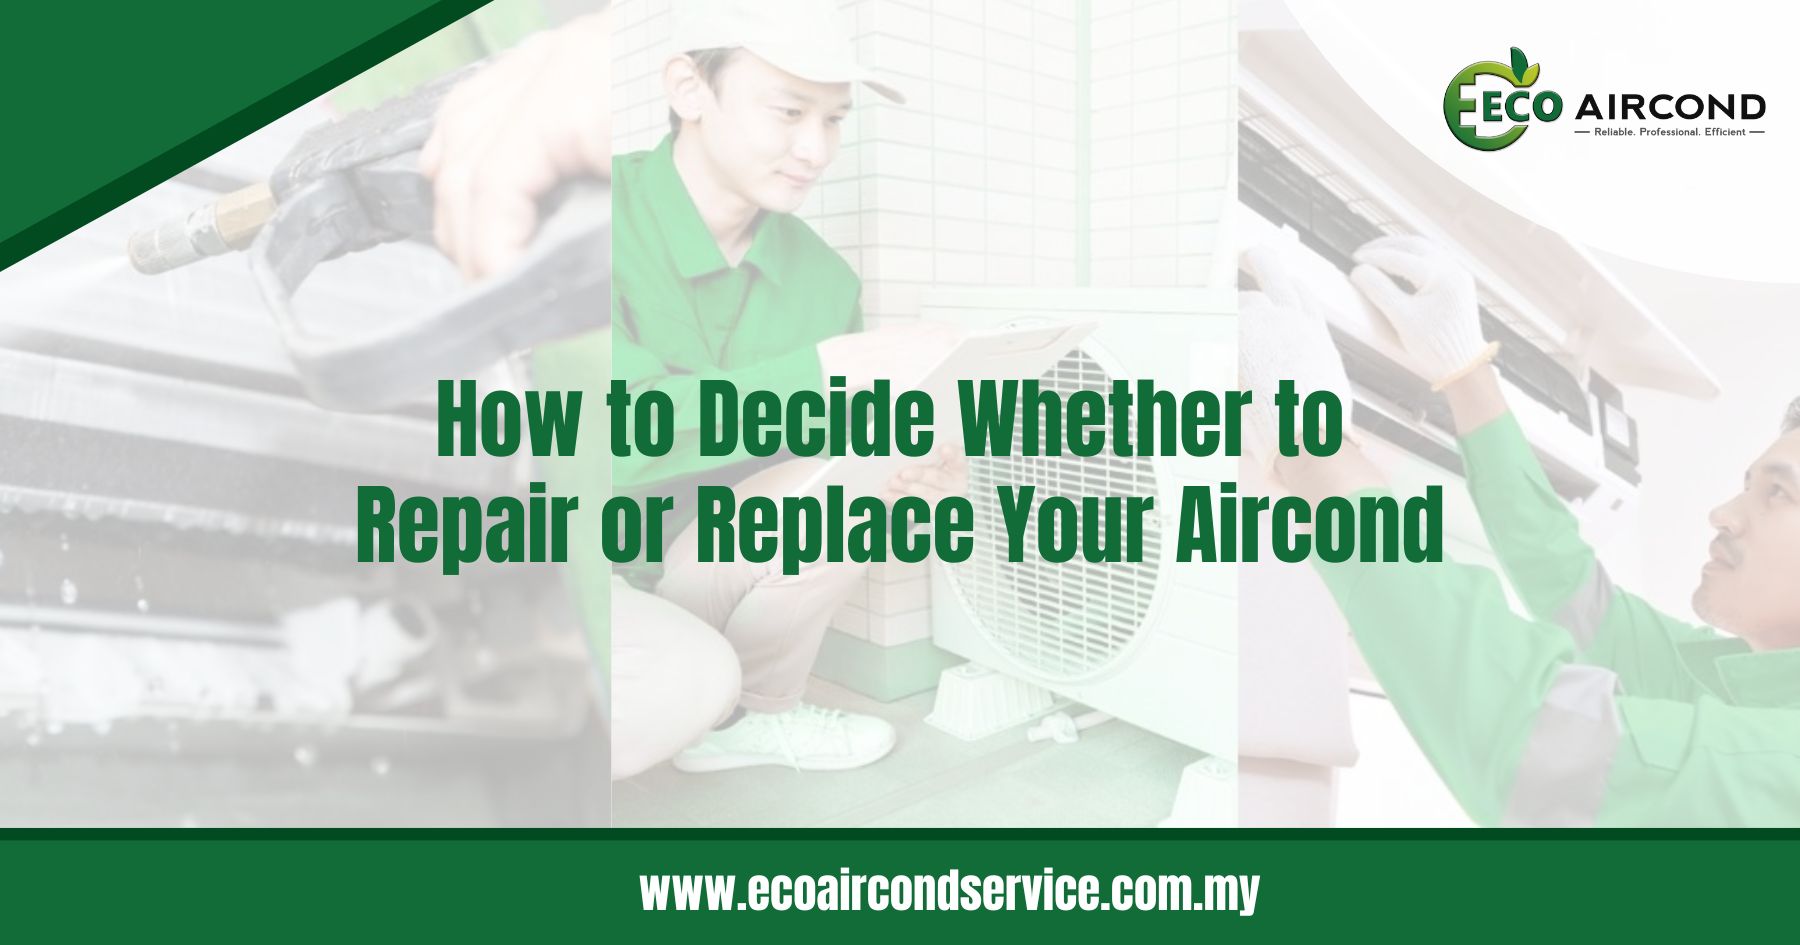 How to Decide Whether to Repair or Replace Your Aircond